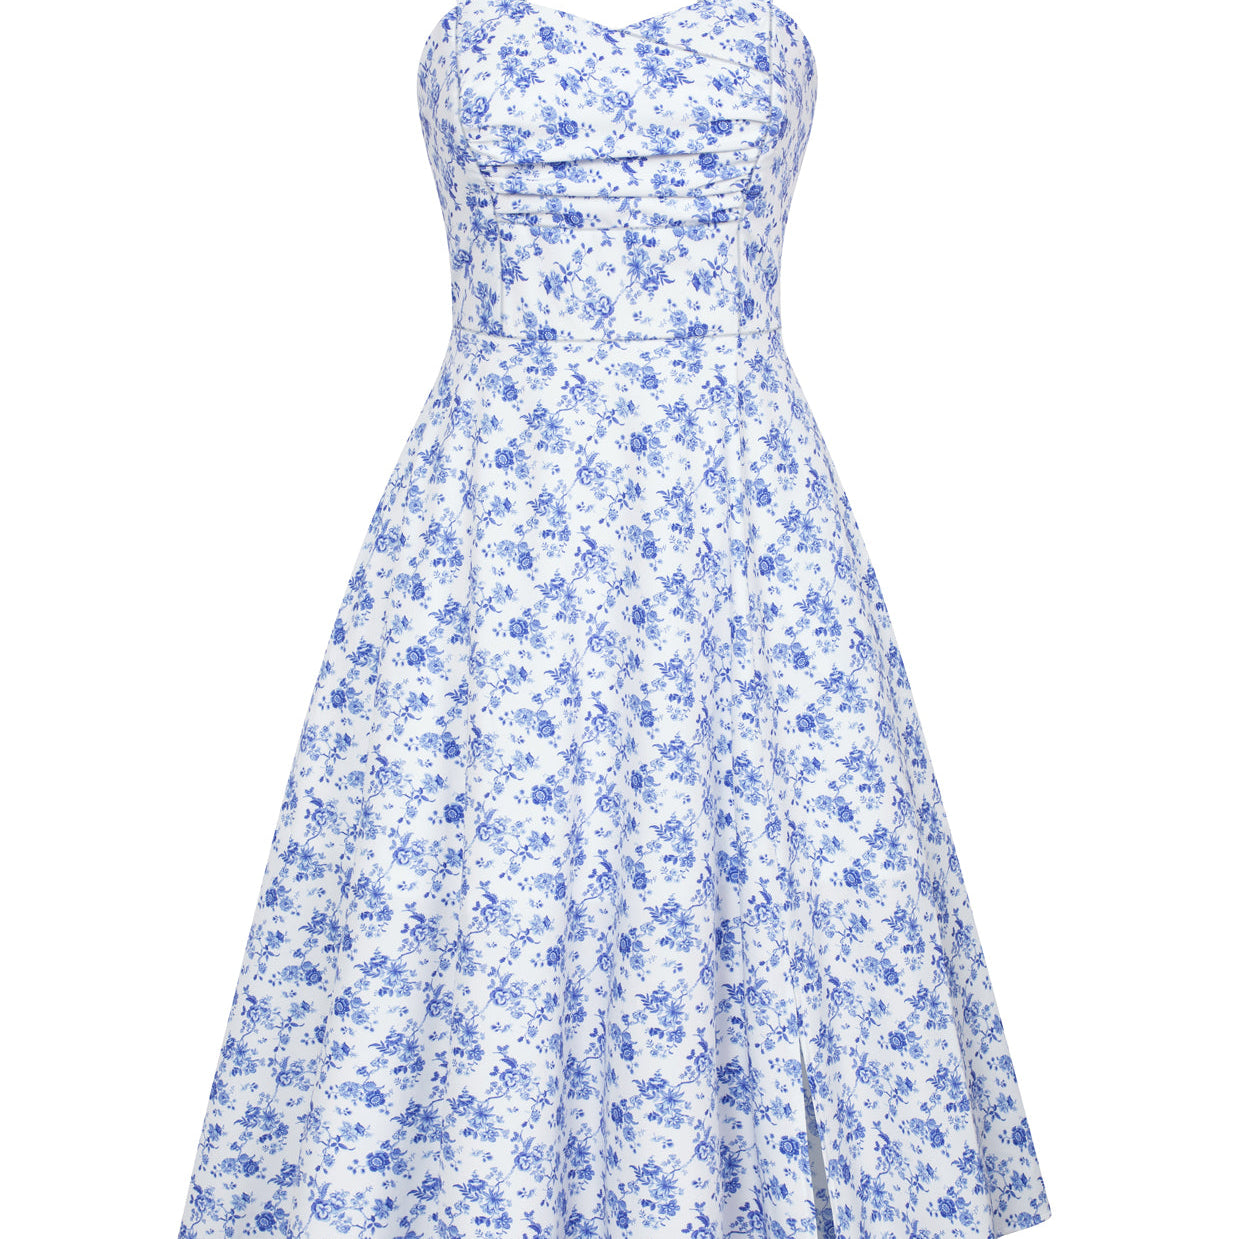 Vintage Floral Patterns Cocktail Dress Sleeveless Spaghetti Strap Ruched Slit A Line Swing Dress with Pockets